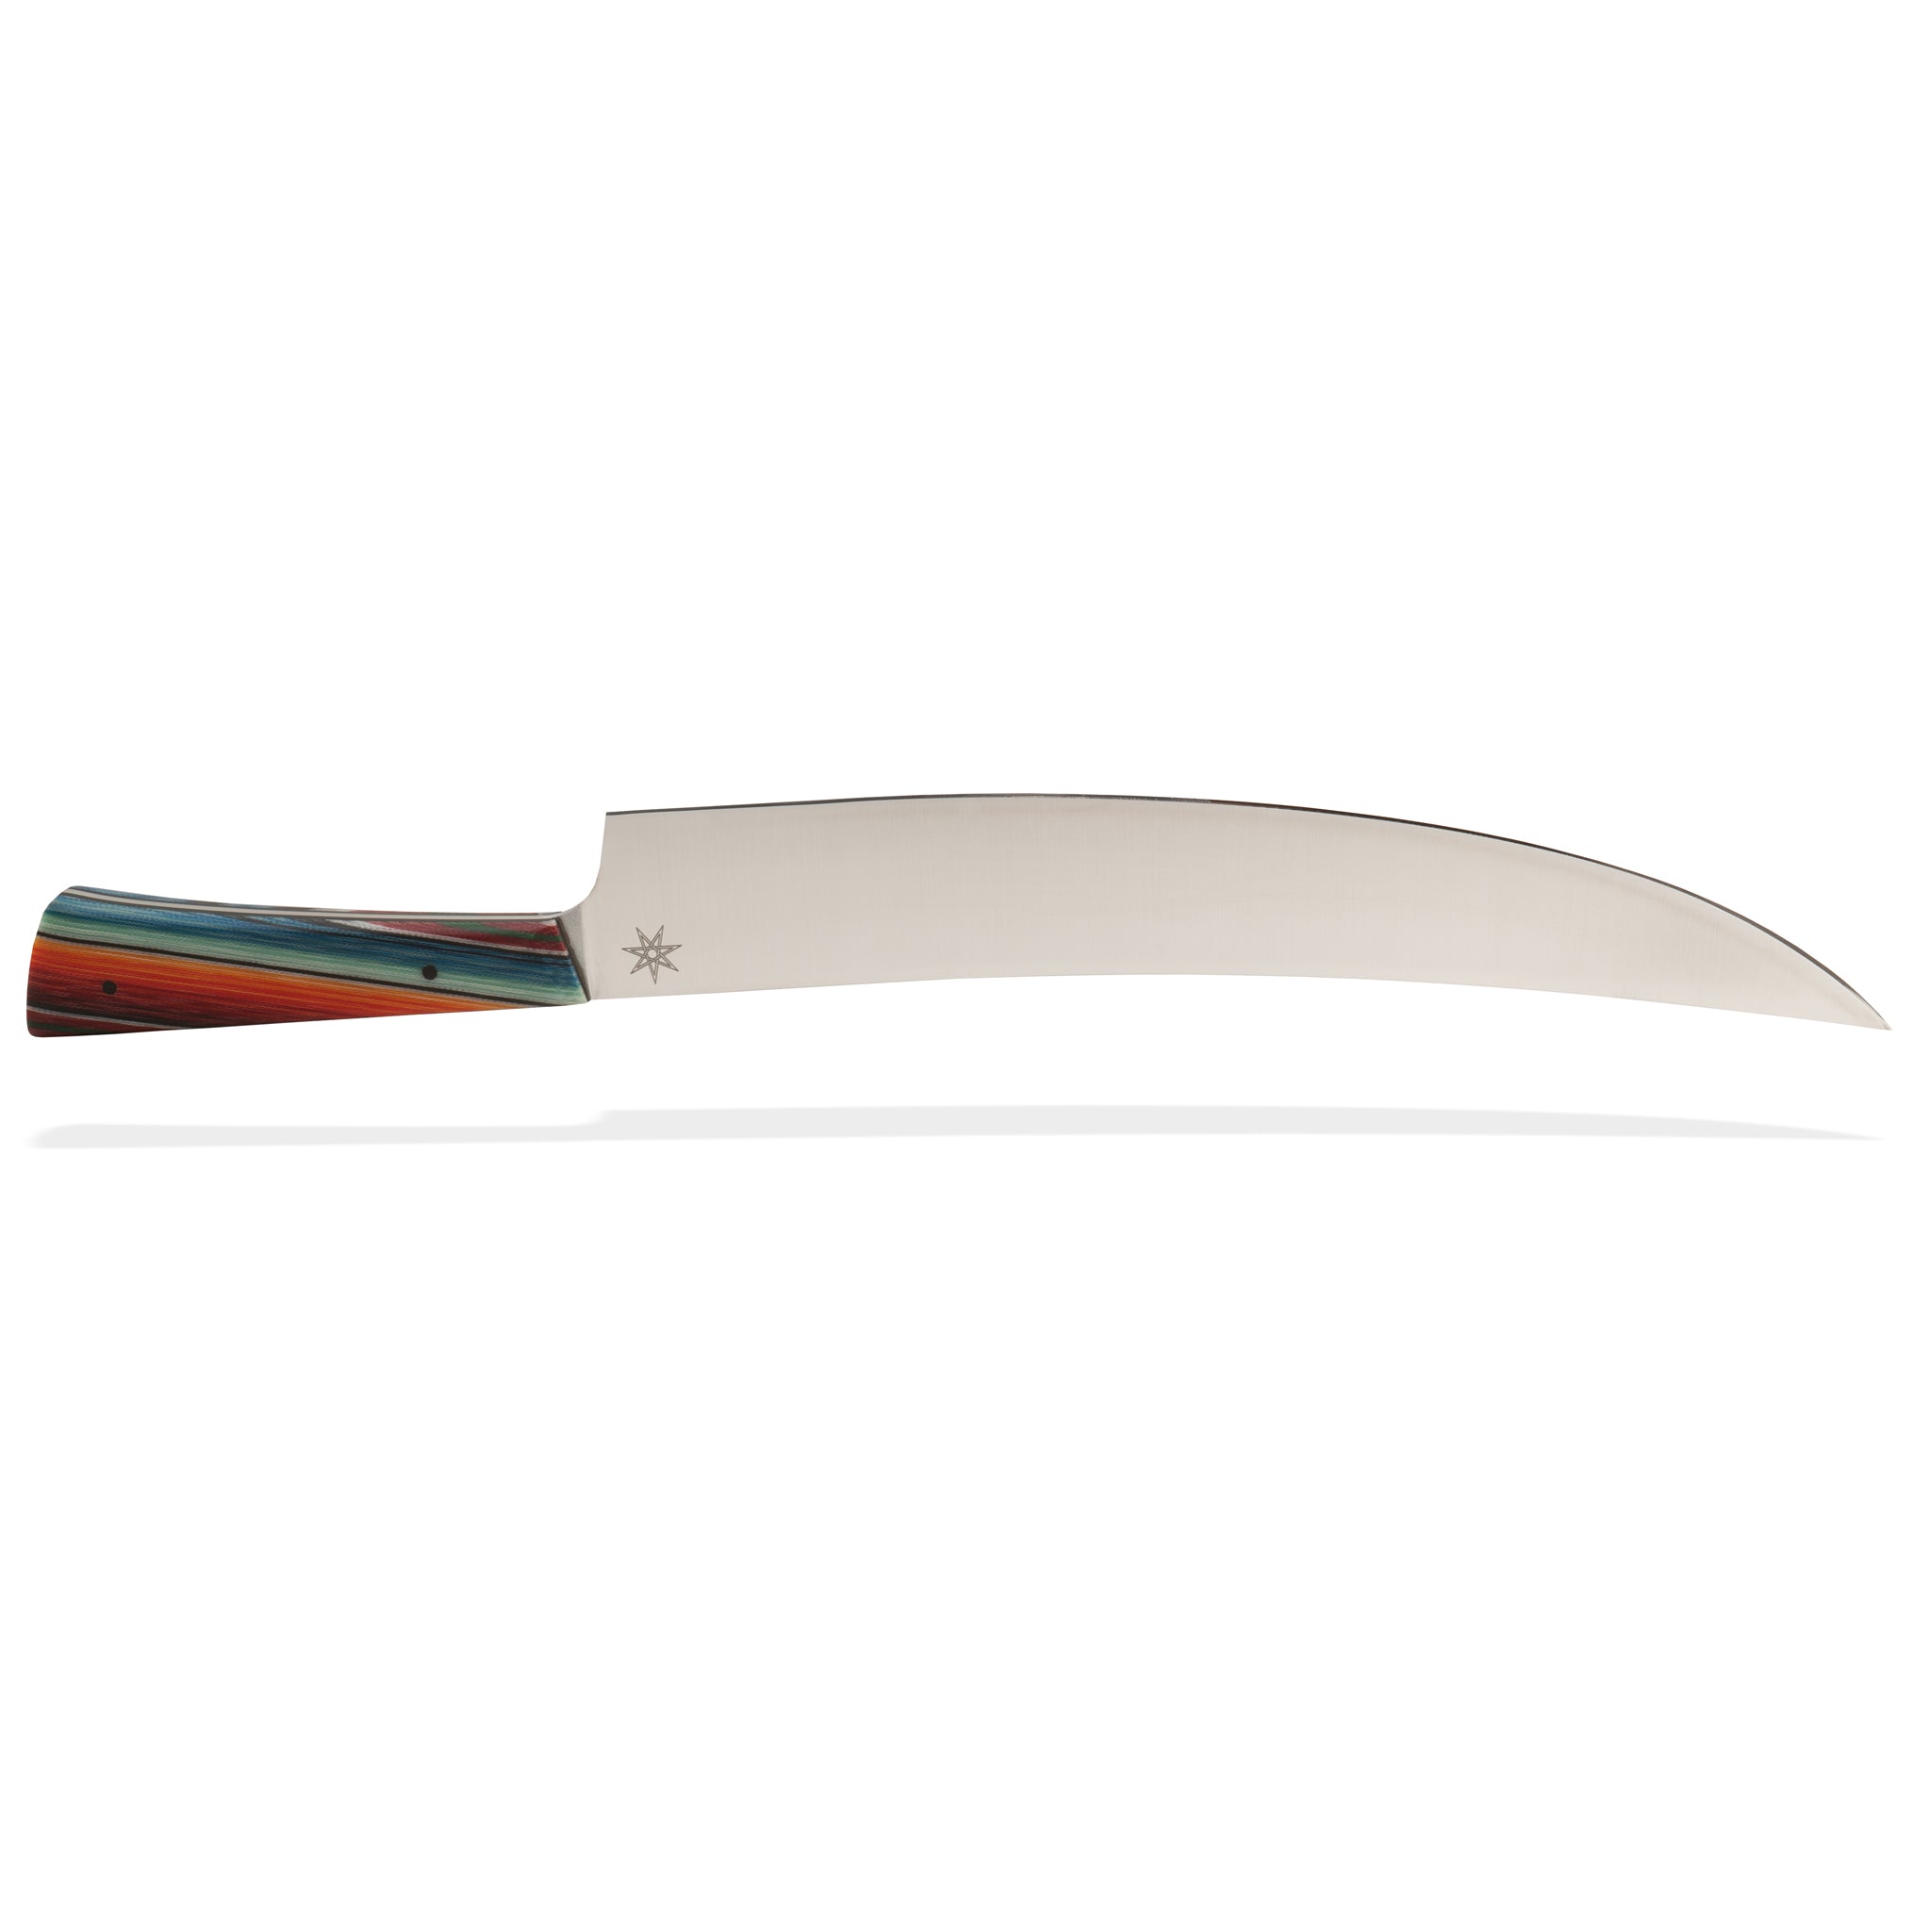 11" stainless steel serrated Scimitar knife by Town Cutler featuring the Baja “Mexican Blanket Especial” handle. Handmade professional knives for chefs and foodies. American made professional culinary knives.